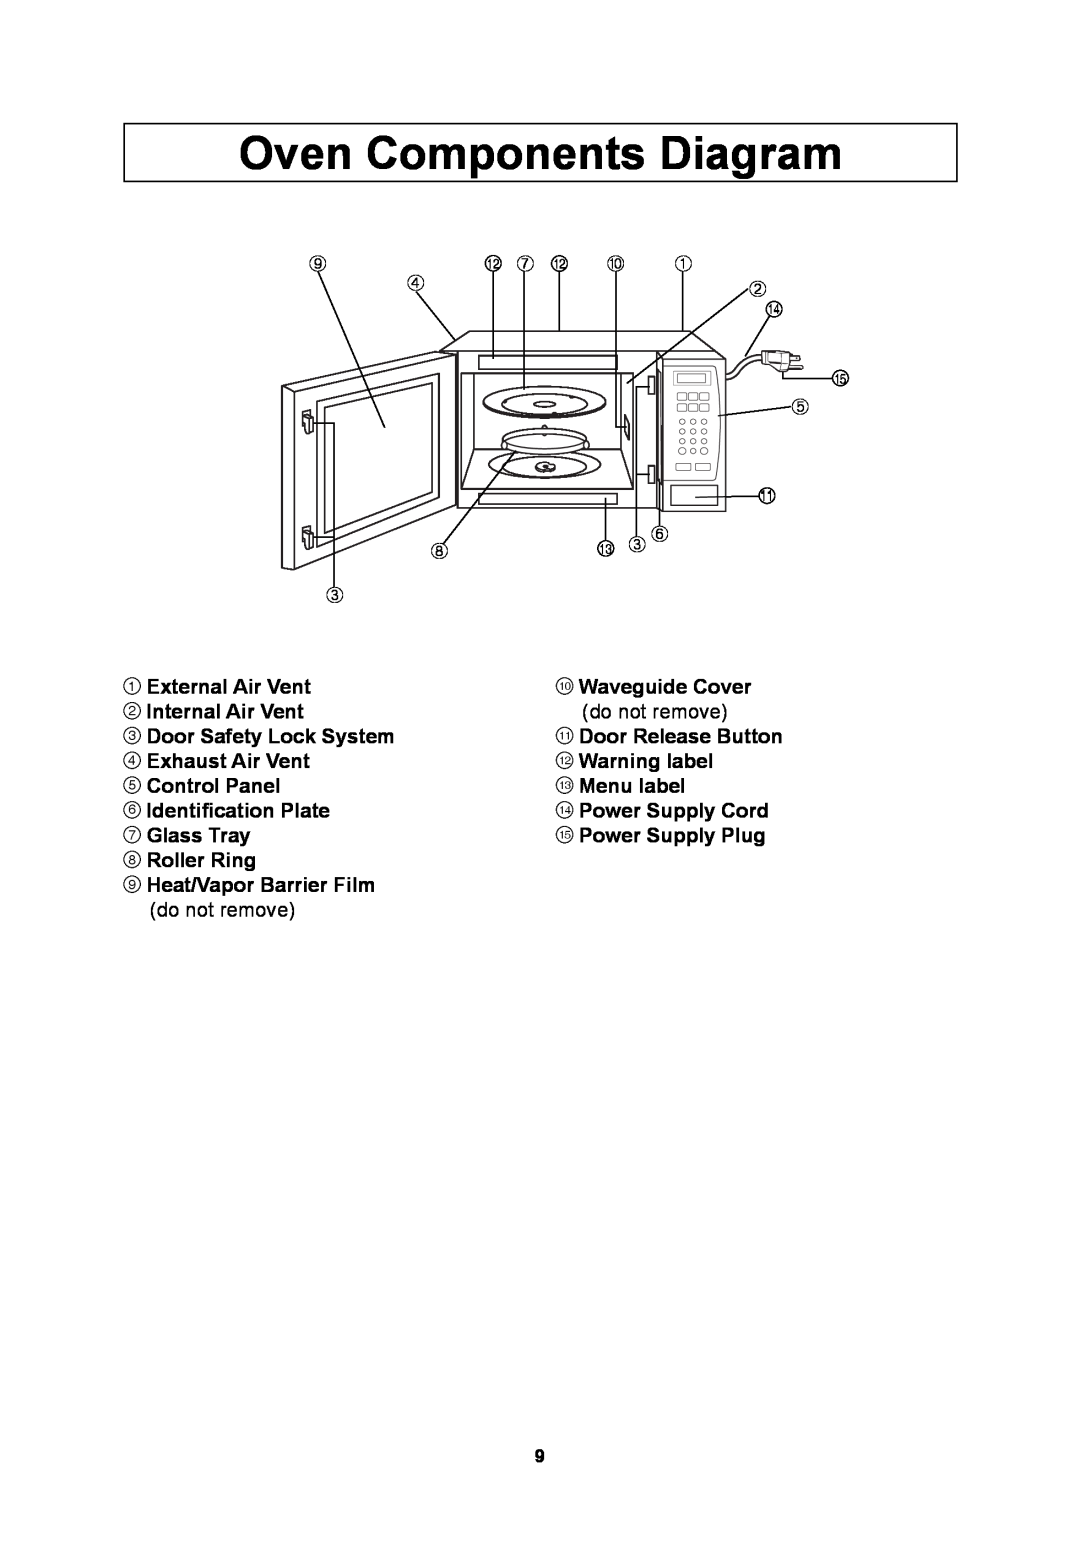 Panasonic NNSN773S important safety instructions Oven Components Diagram 